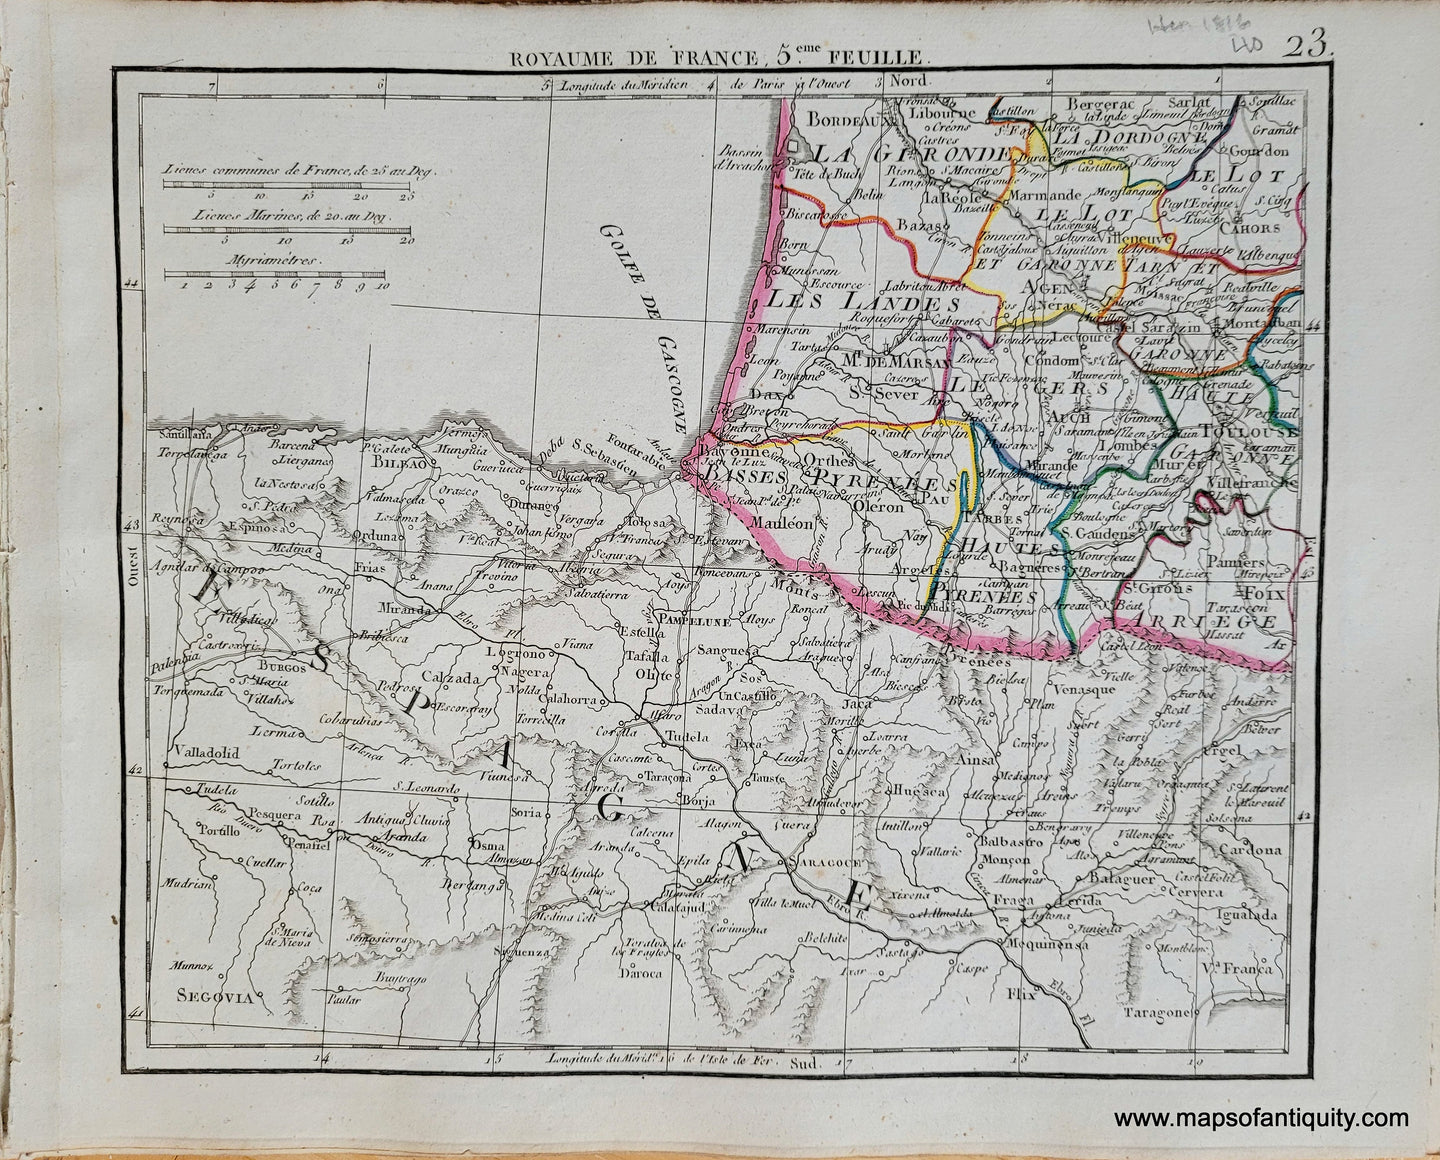 Genuine-Antique-Map-France-in-6-sheets-Sheet-5-Royaume-de-France-5eme-Feuille-France-1816-Herisson-Maps-Of-Antiquity-1800s-19th-century